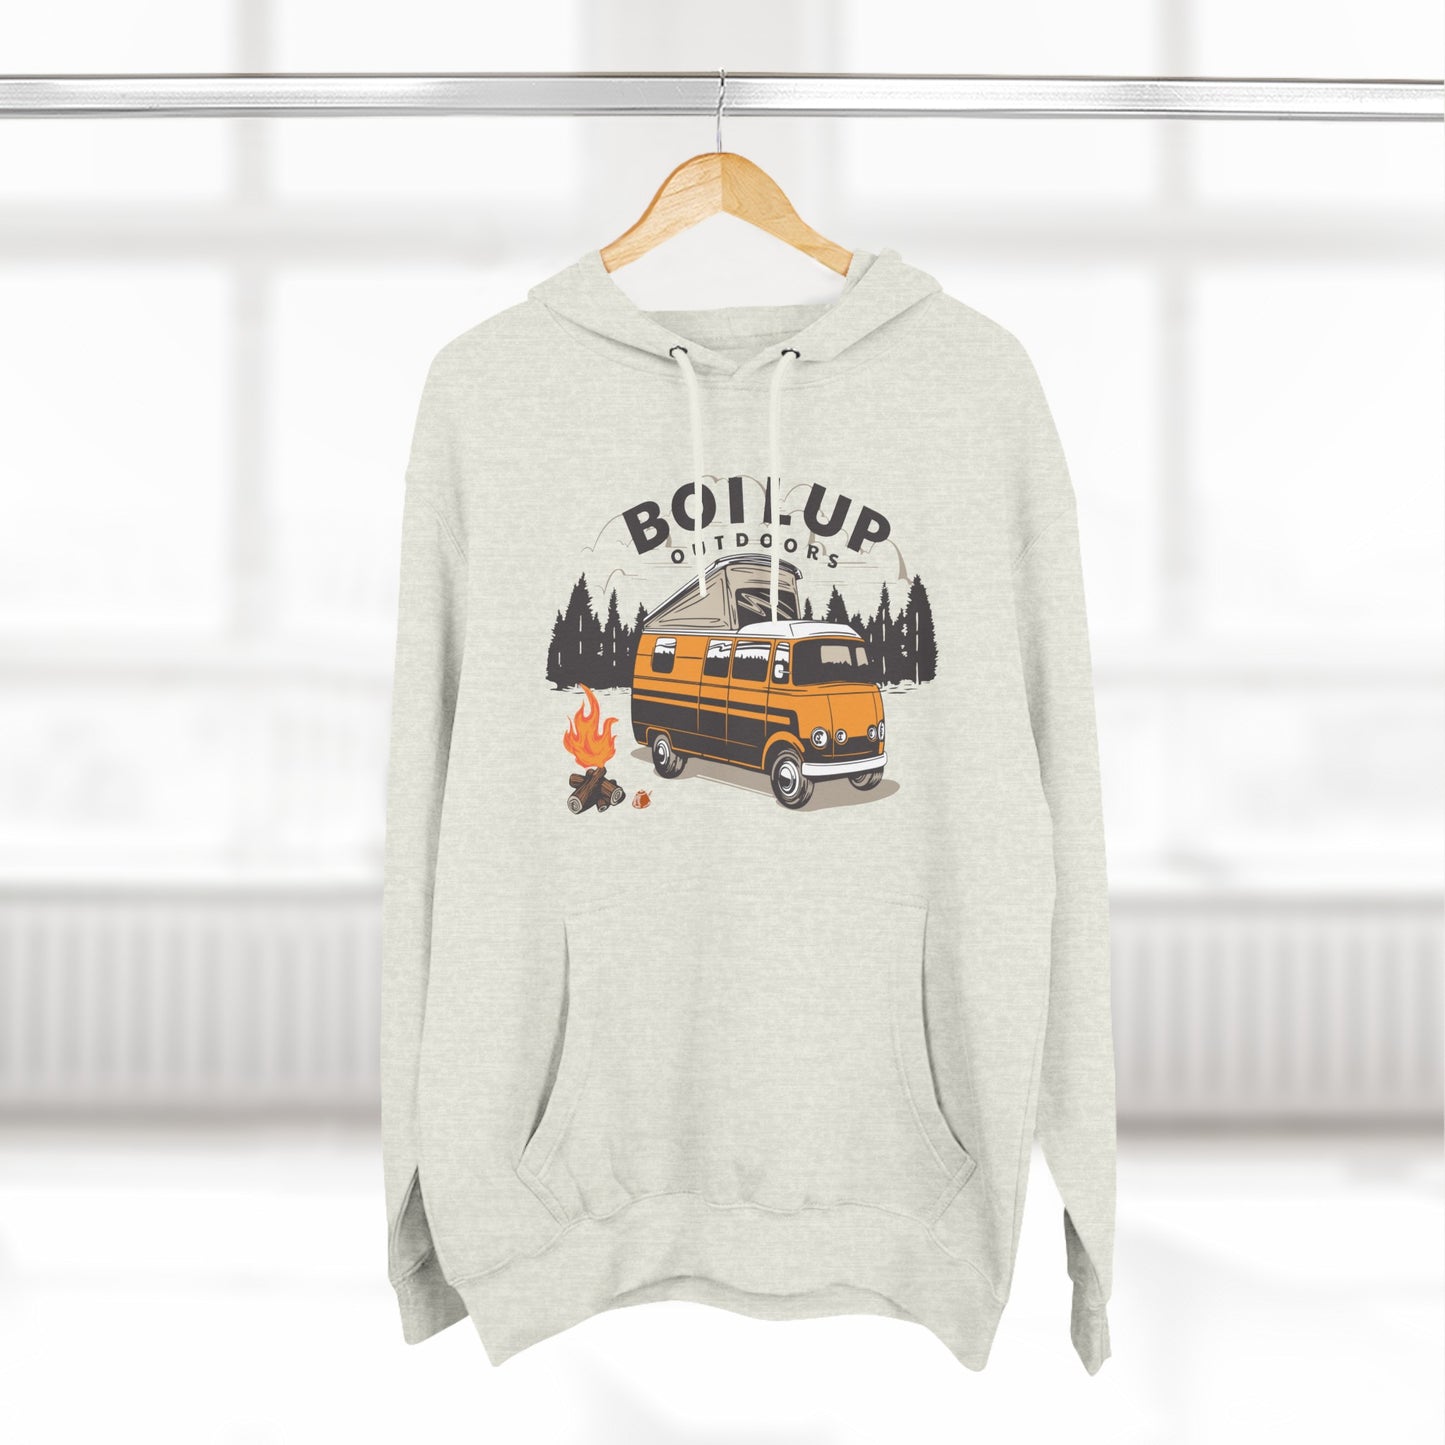 Unisex Westy Hoodie FREE SHIPPING